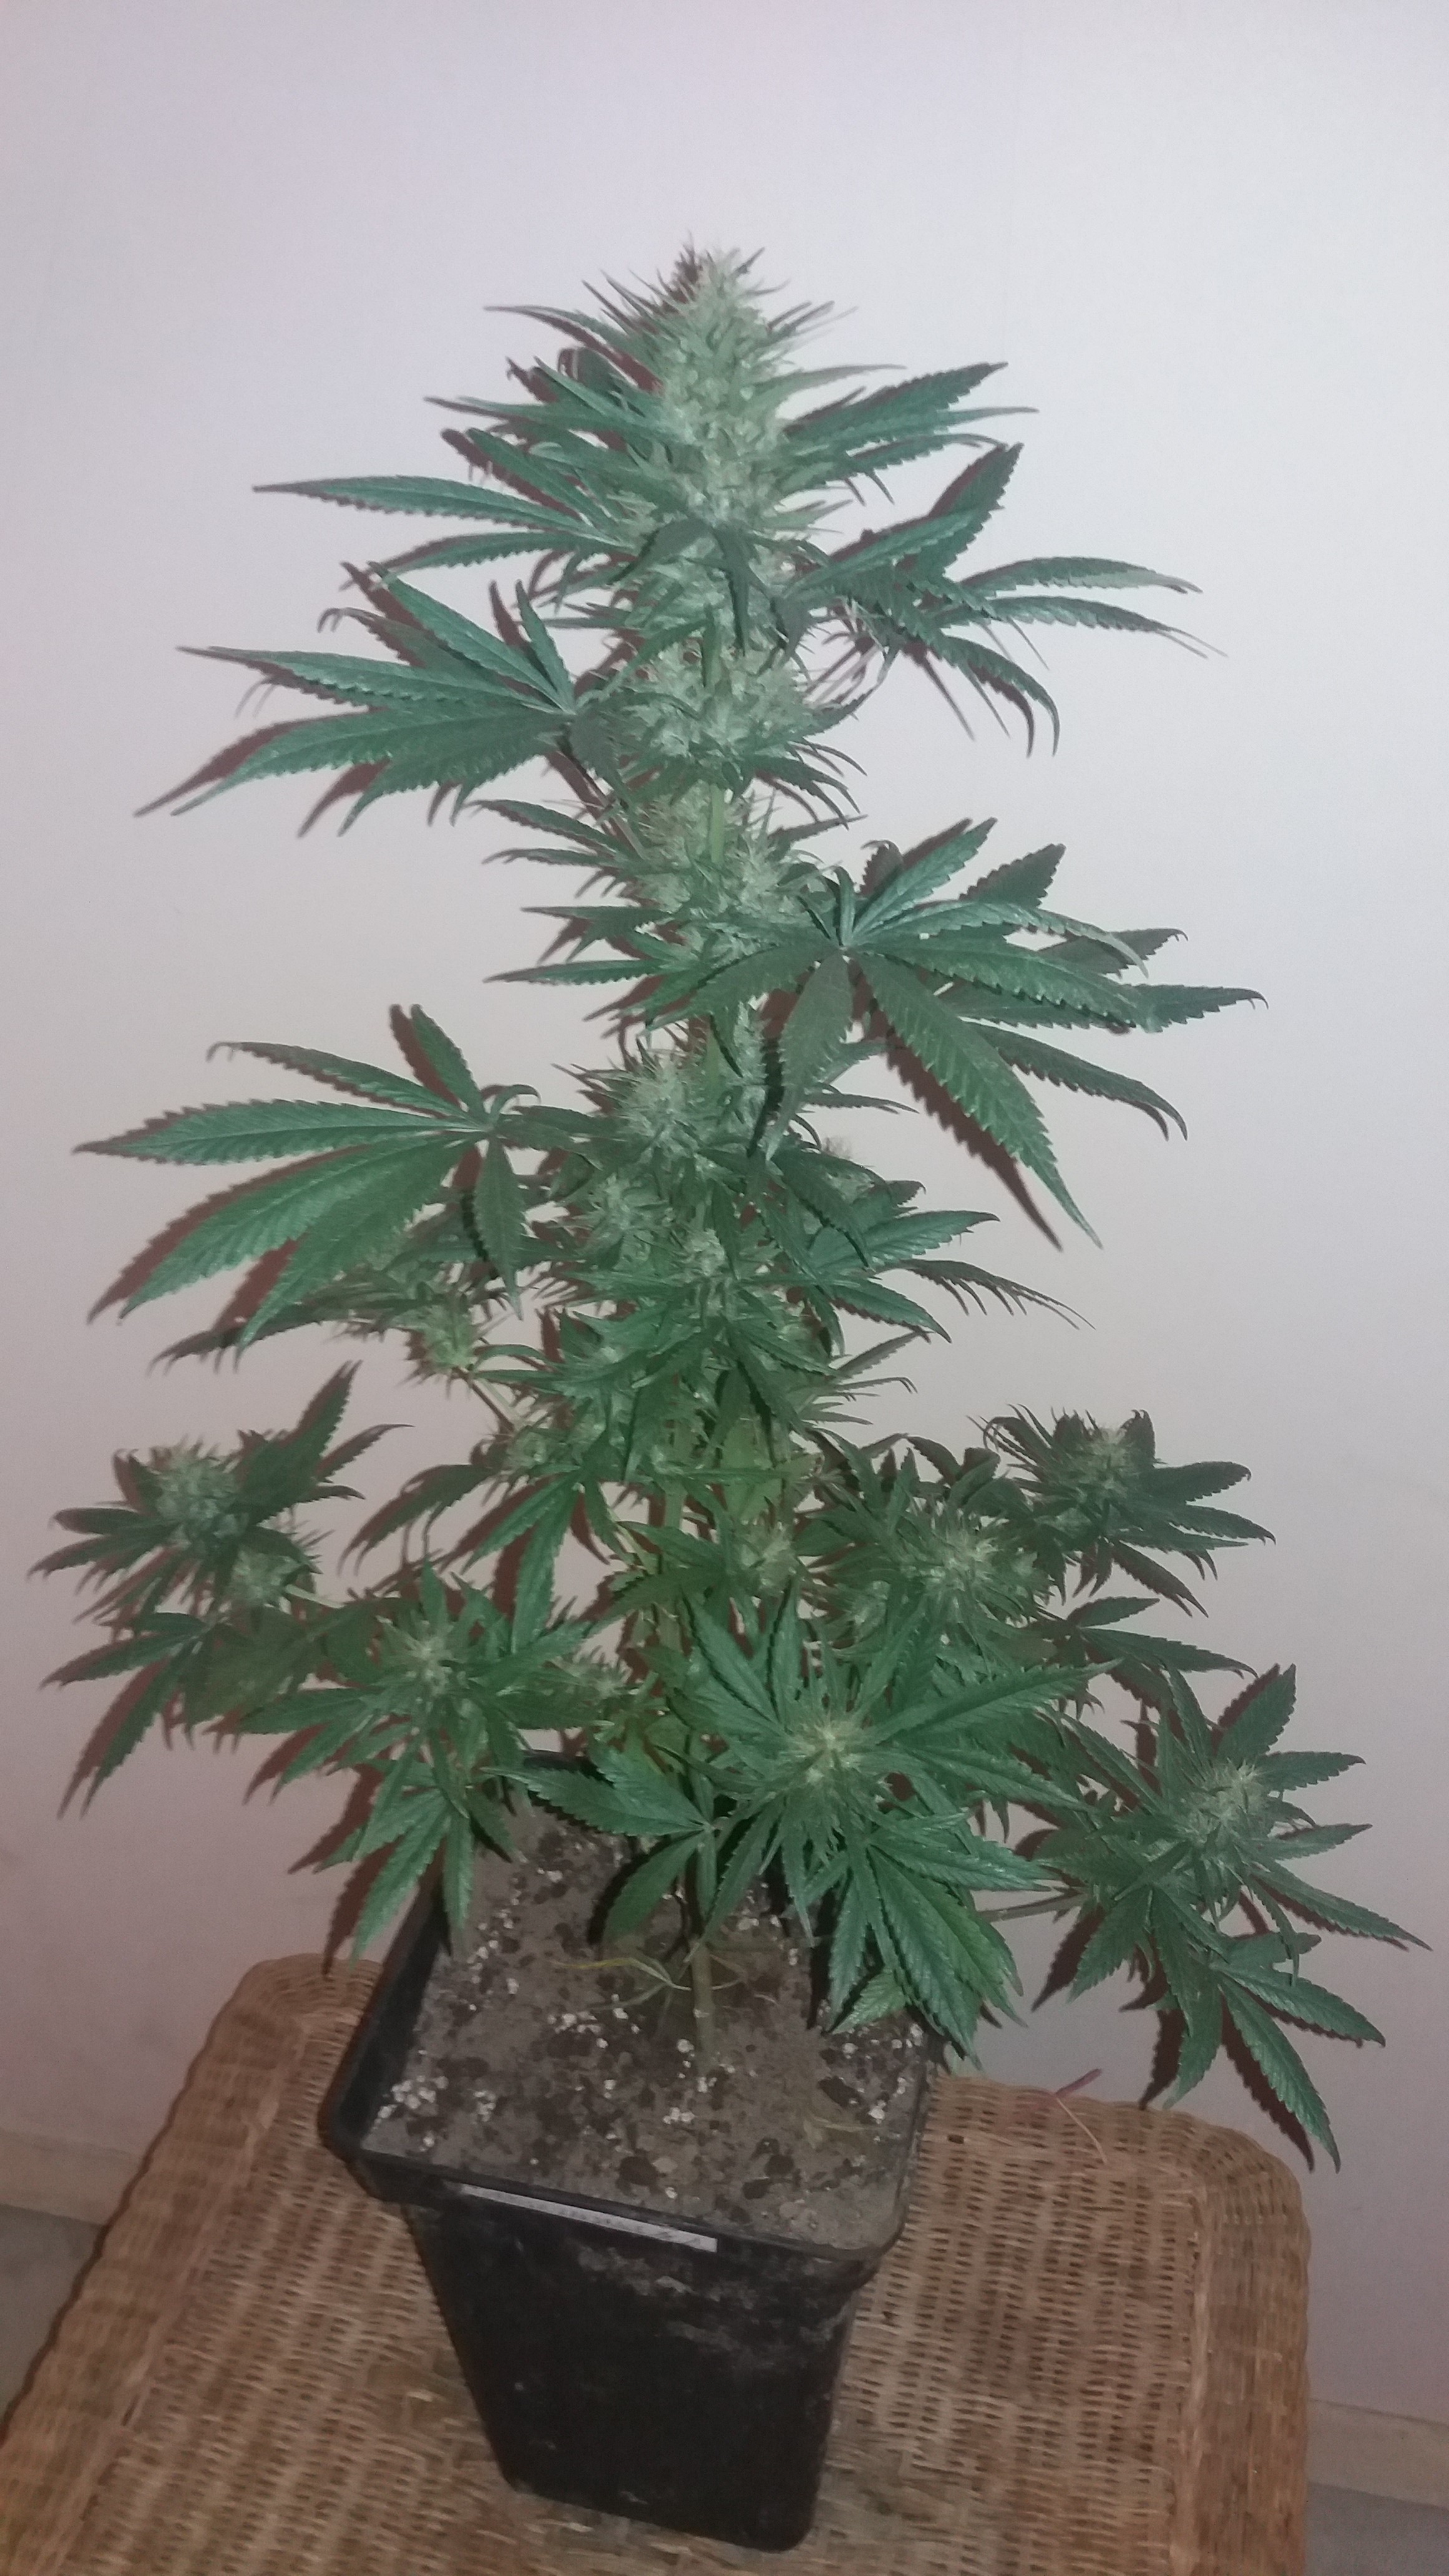 Turkish landrace from USC seeds for a hash flavour and large buds